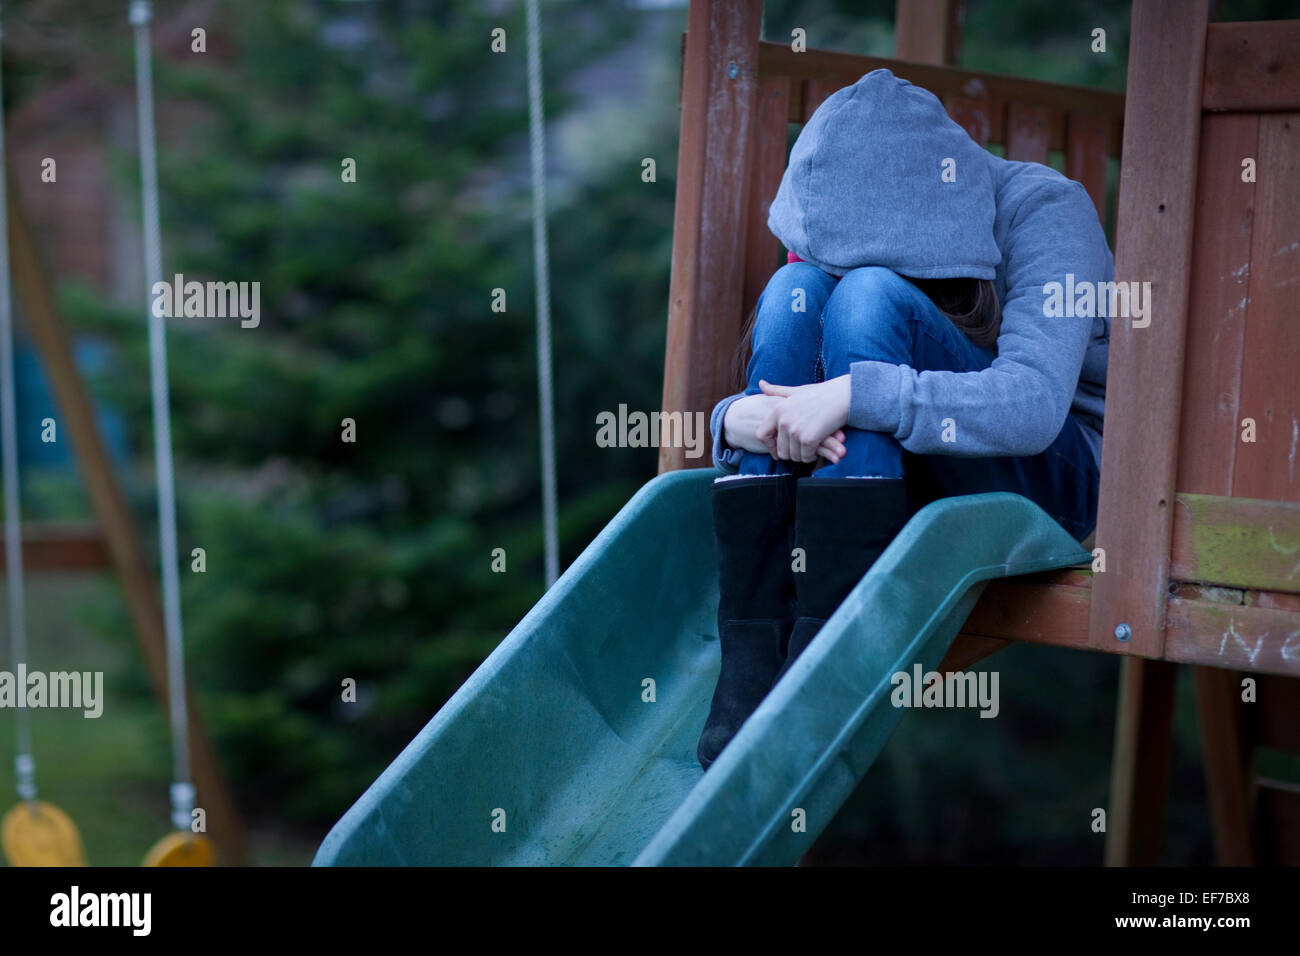 Sad child in hoodie with face hidden, sitting alone in a playground in despair. Stock Photo